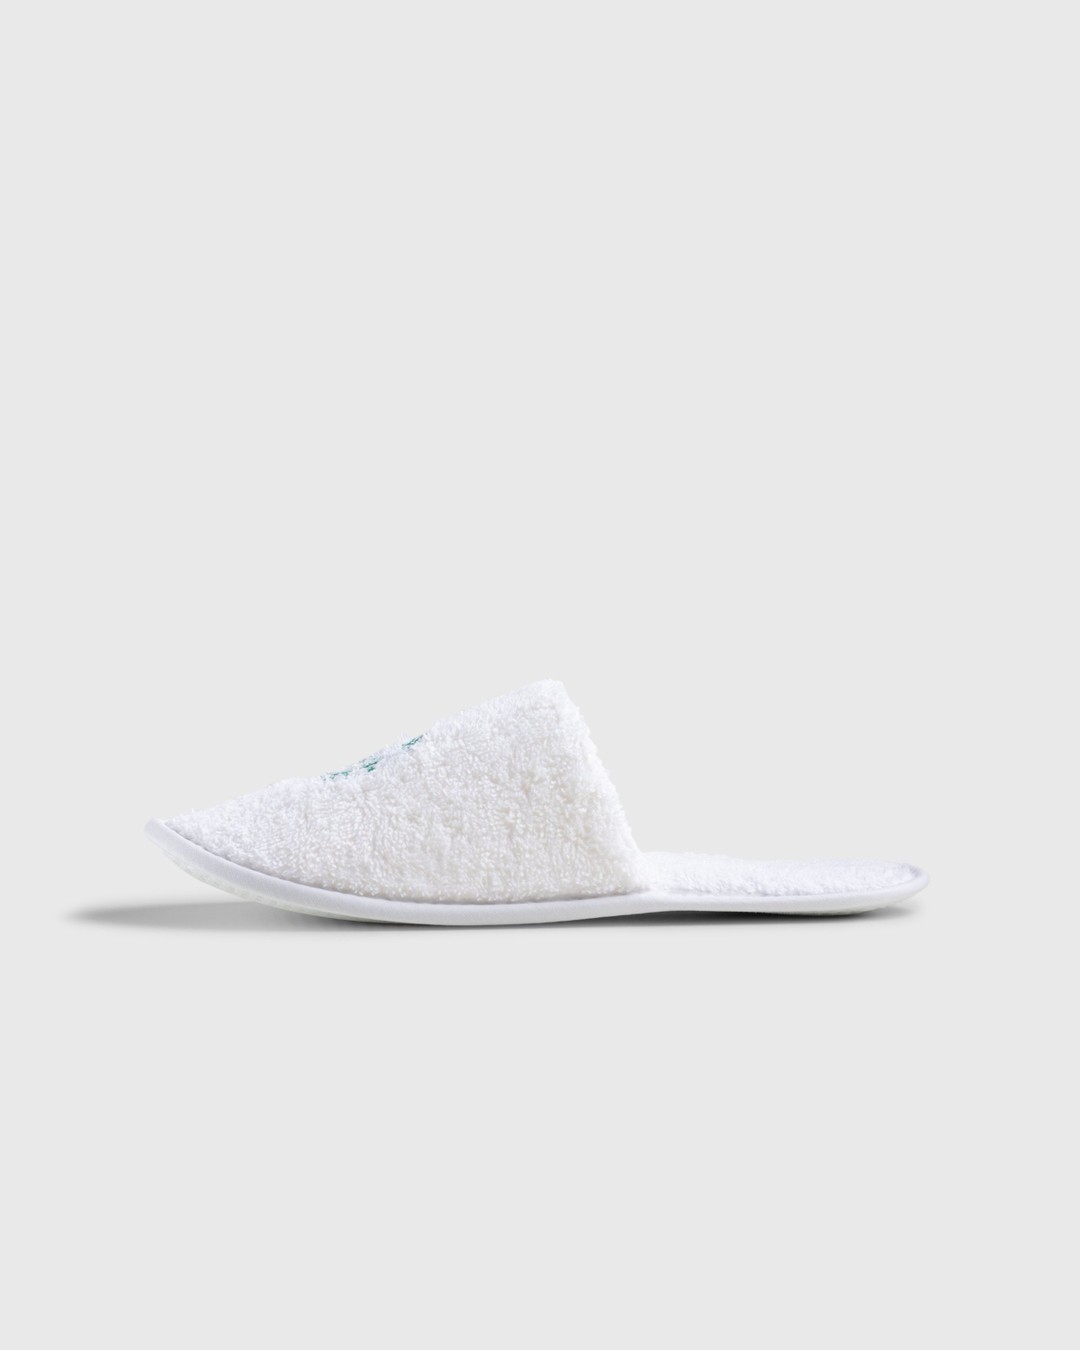 Hotel Amour x Highsnobiety – Not In Paris 4 Slippers White - Sandals - White - Image 3